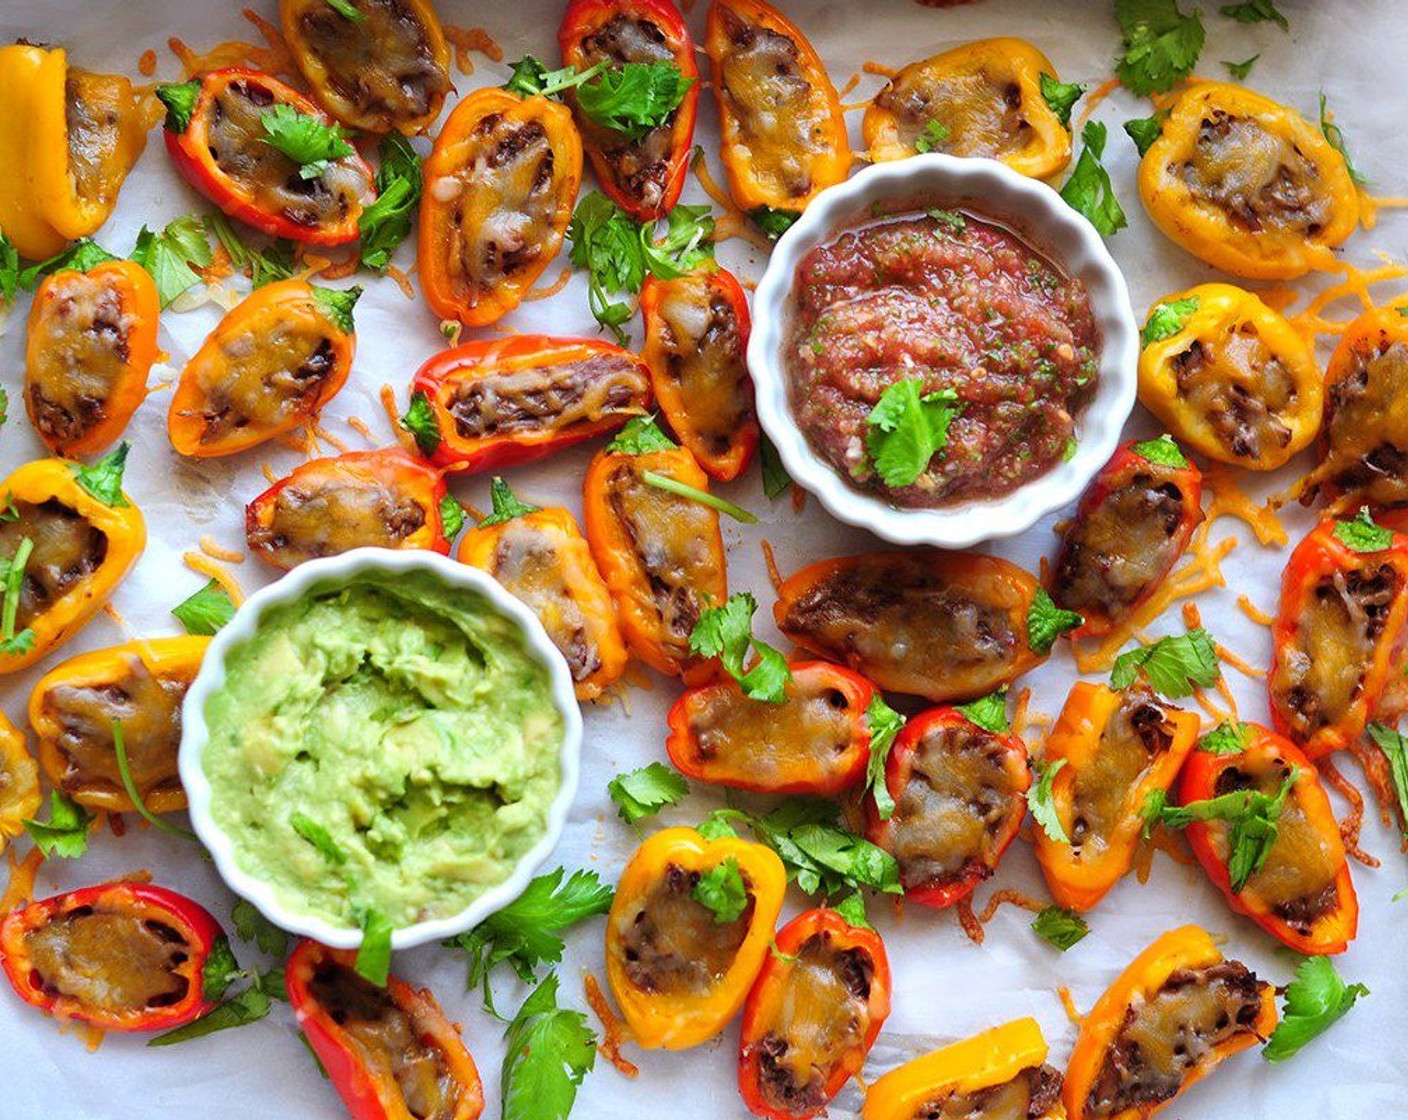 step 6 To serve, grab one mini stuffed pepper and dip it into Guacamole (to taste) or salsa, or both! Enjoy!